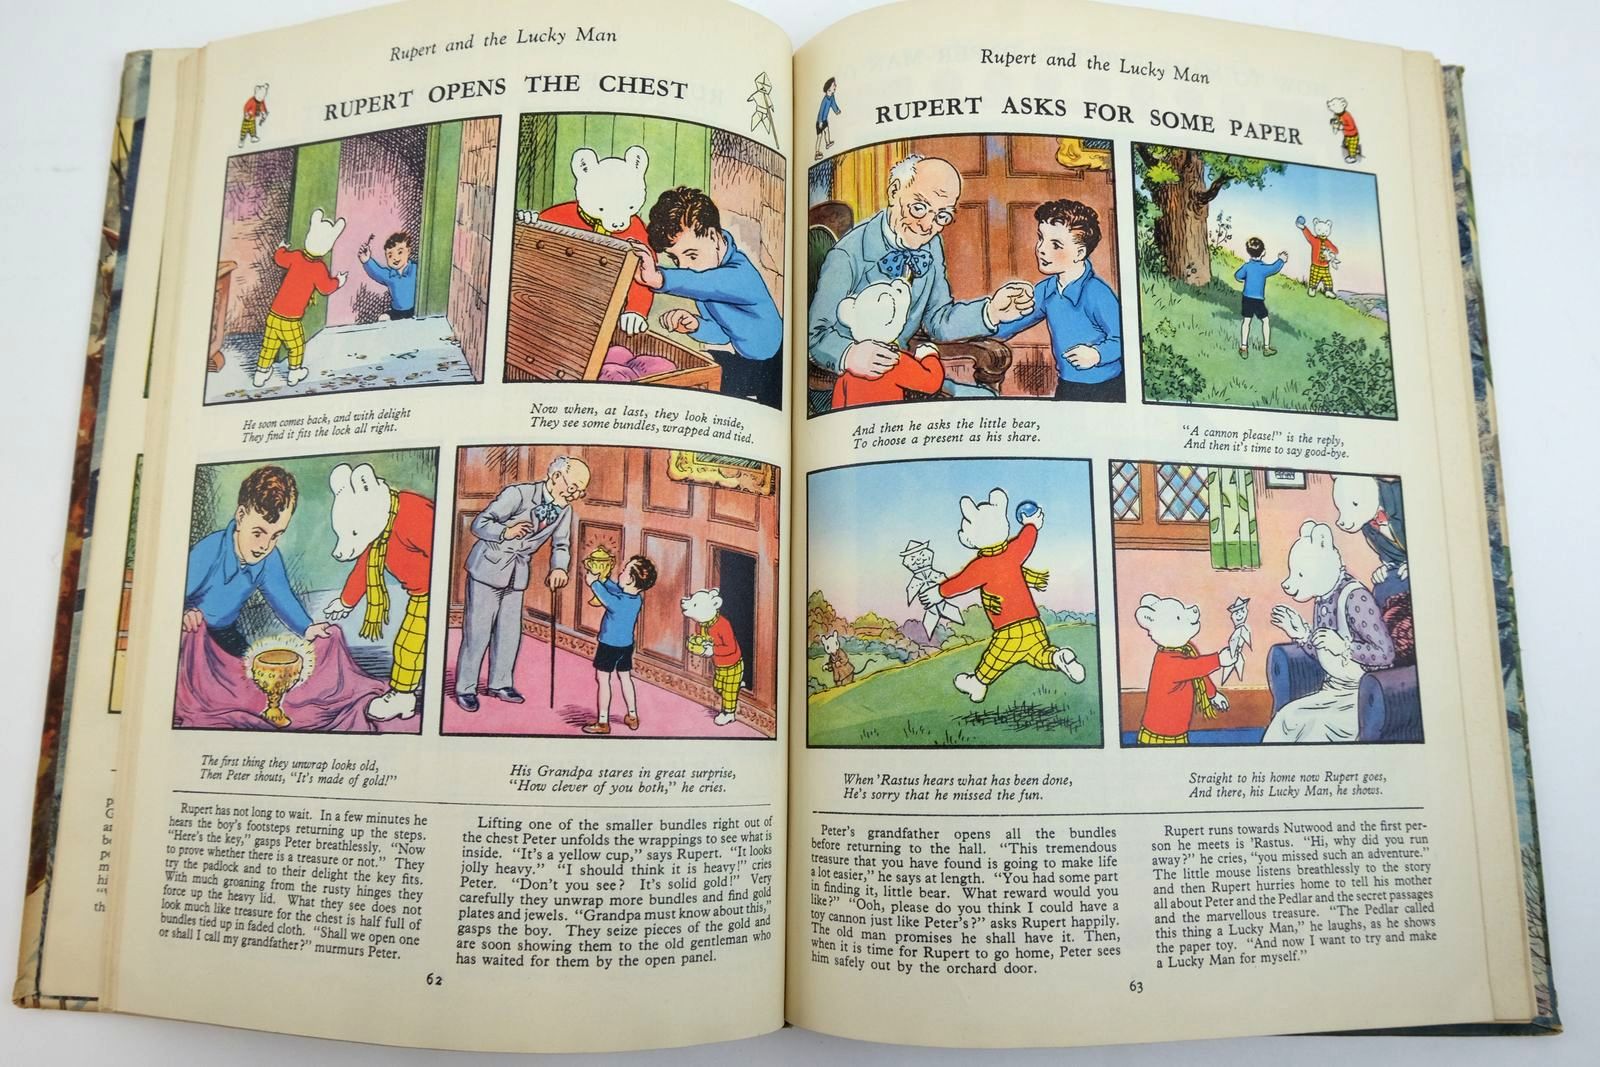 Photo of RUPERT ANNUAL 1951 - THE NEW RUPERT BOOK written by Bestall, Alfred illustrated by Bestall, Alfred published by Daily Express (STOCK CODE: 2135871)  for sale by Stella & Rose's Books